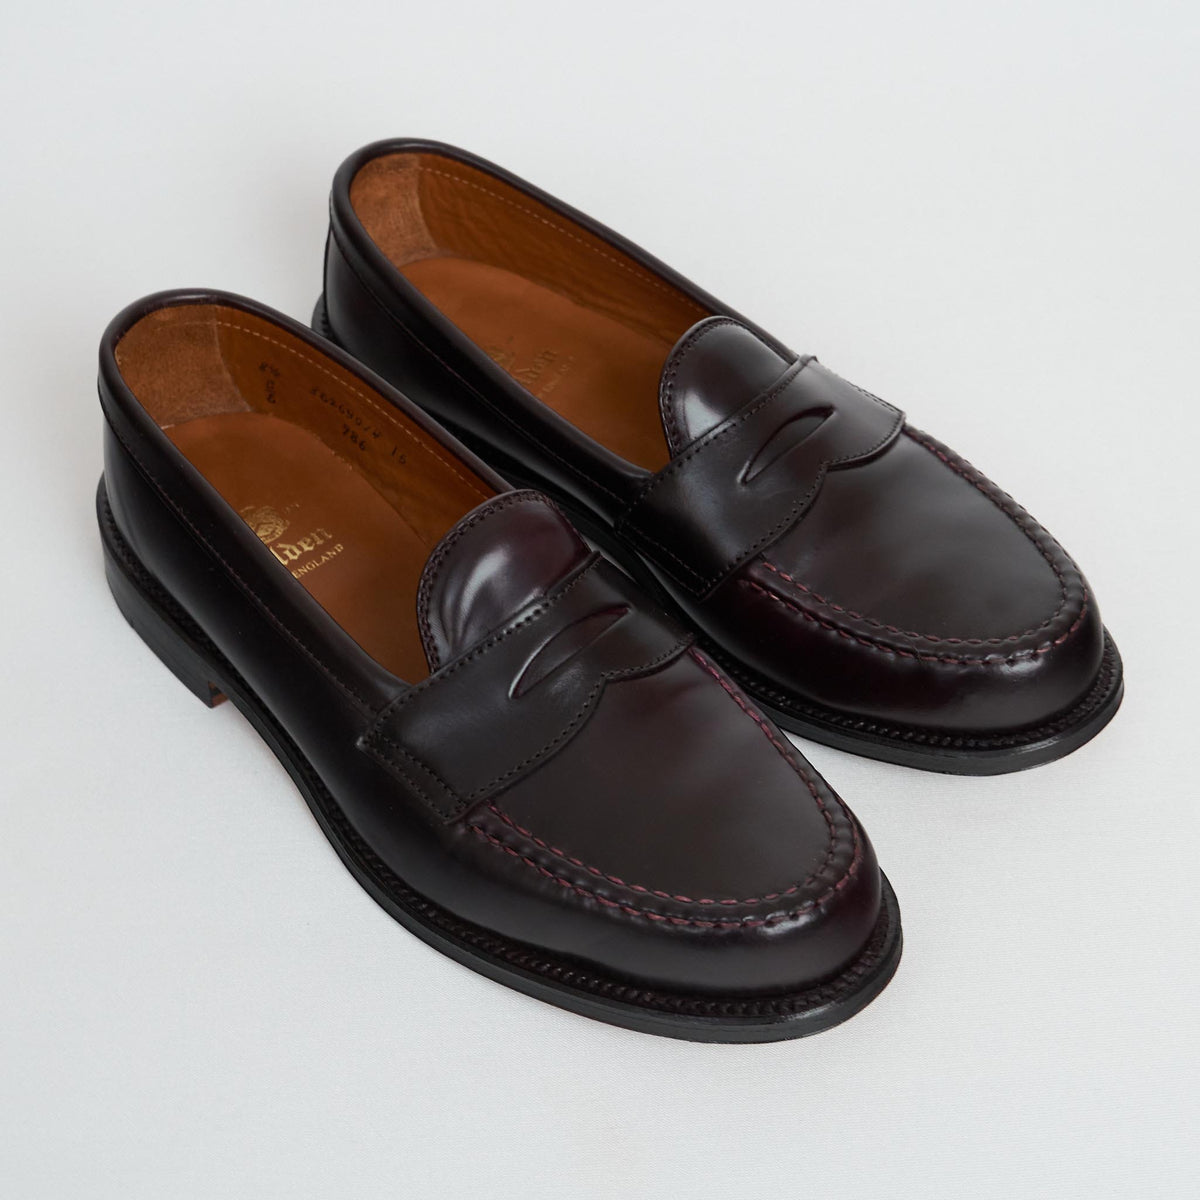 Alden Penny Loafer Shell Cordovan 986 - DeeCee style